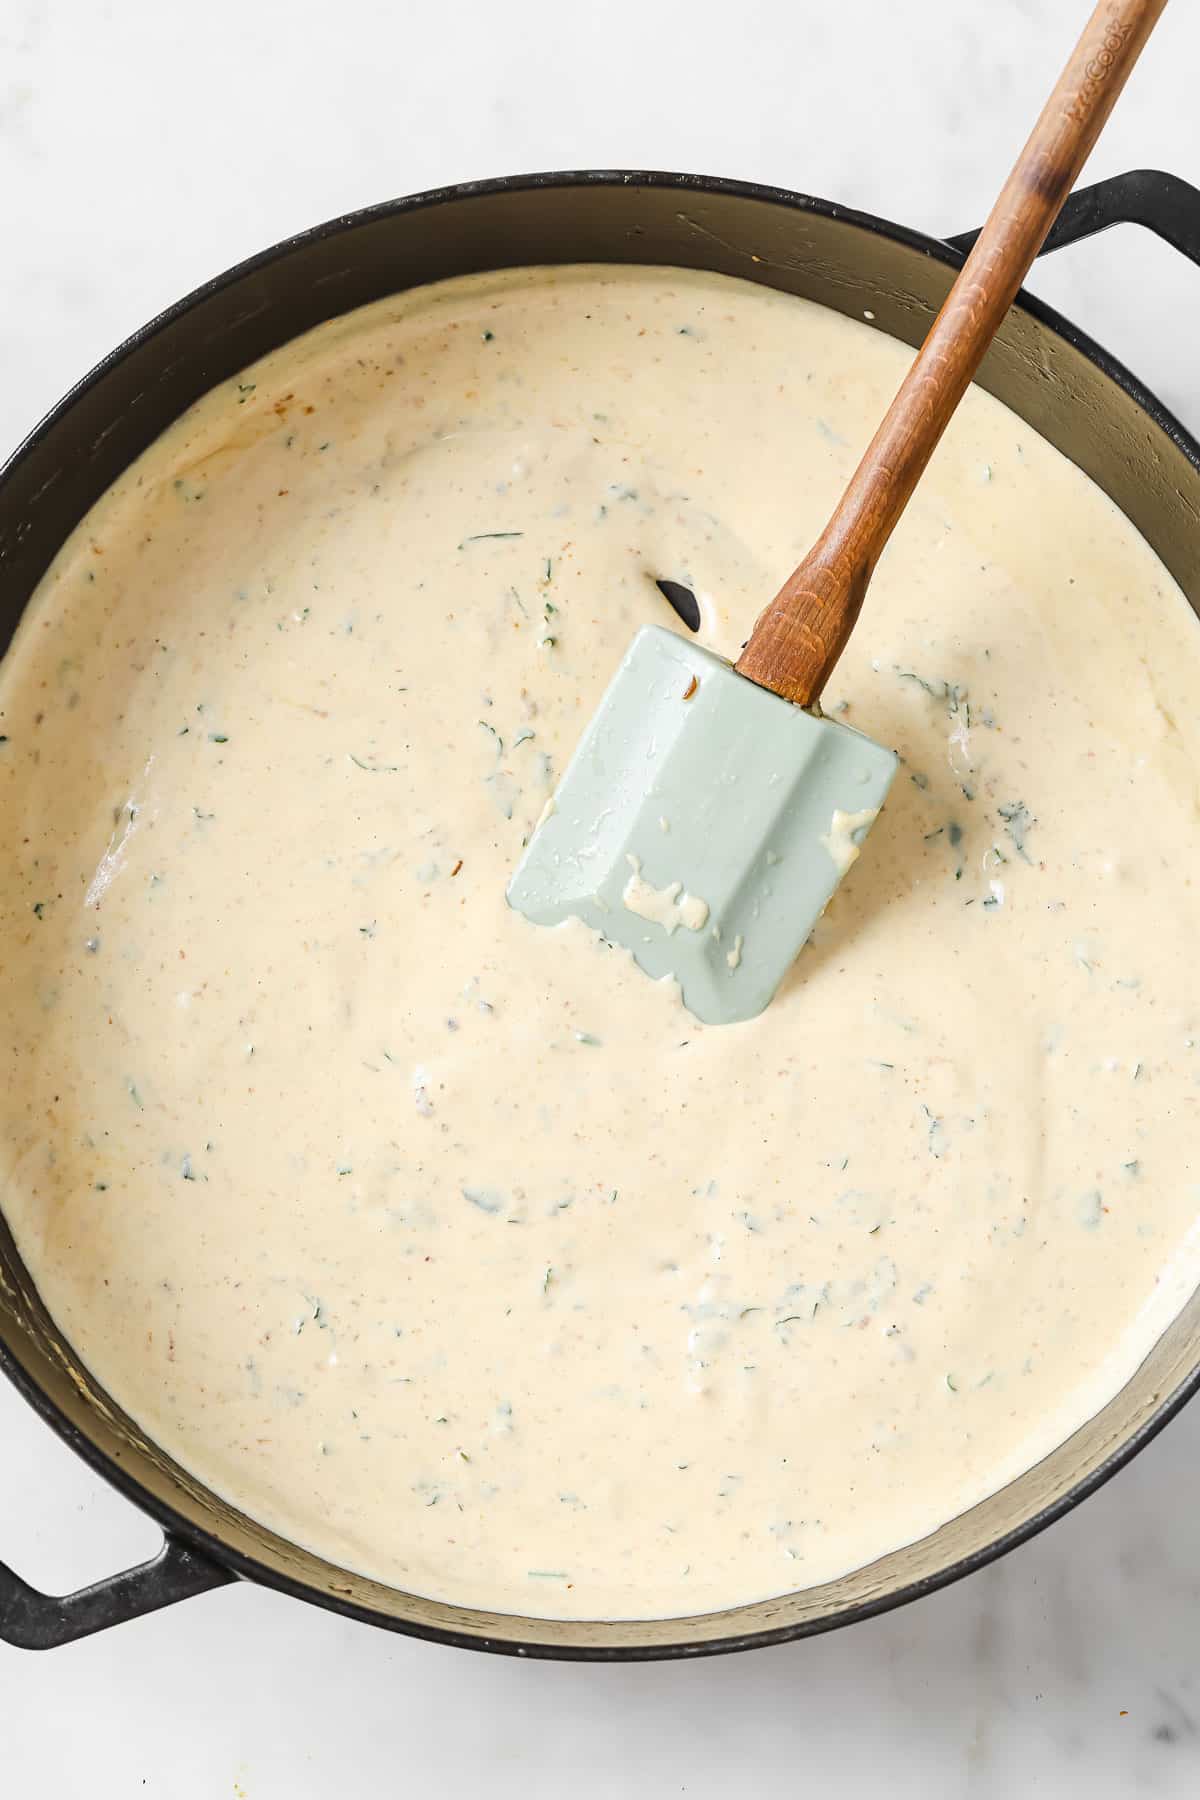 a cast iron skillet with a rich creamy base for gravy cooking.